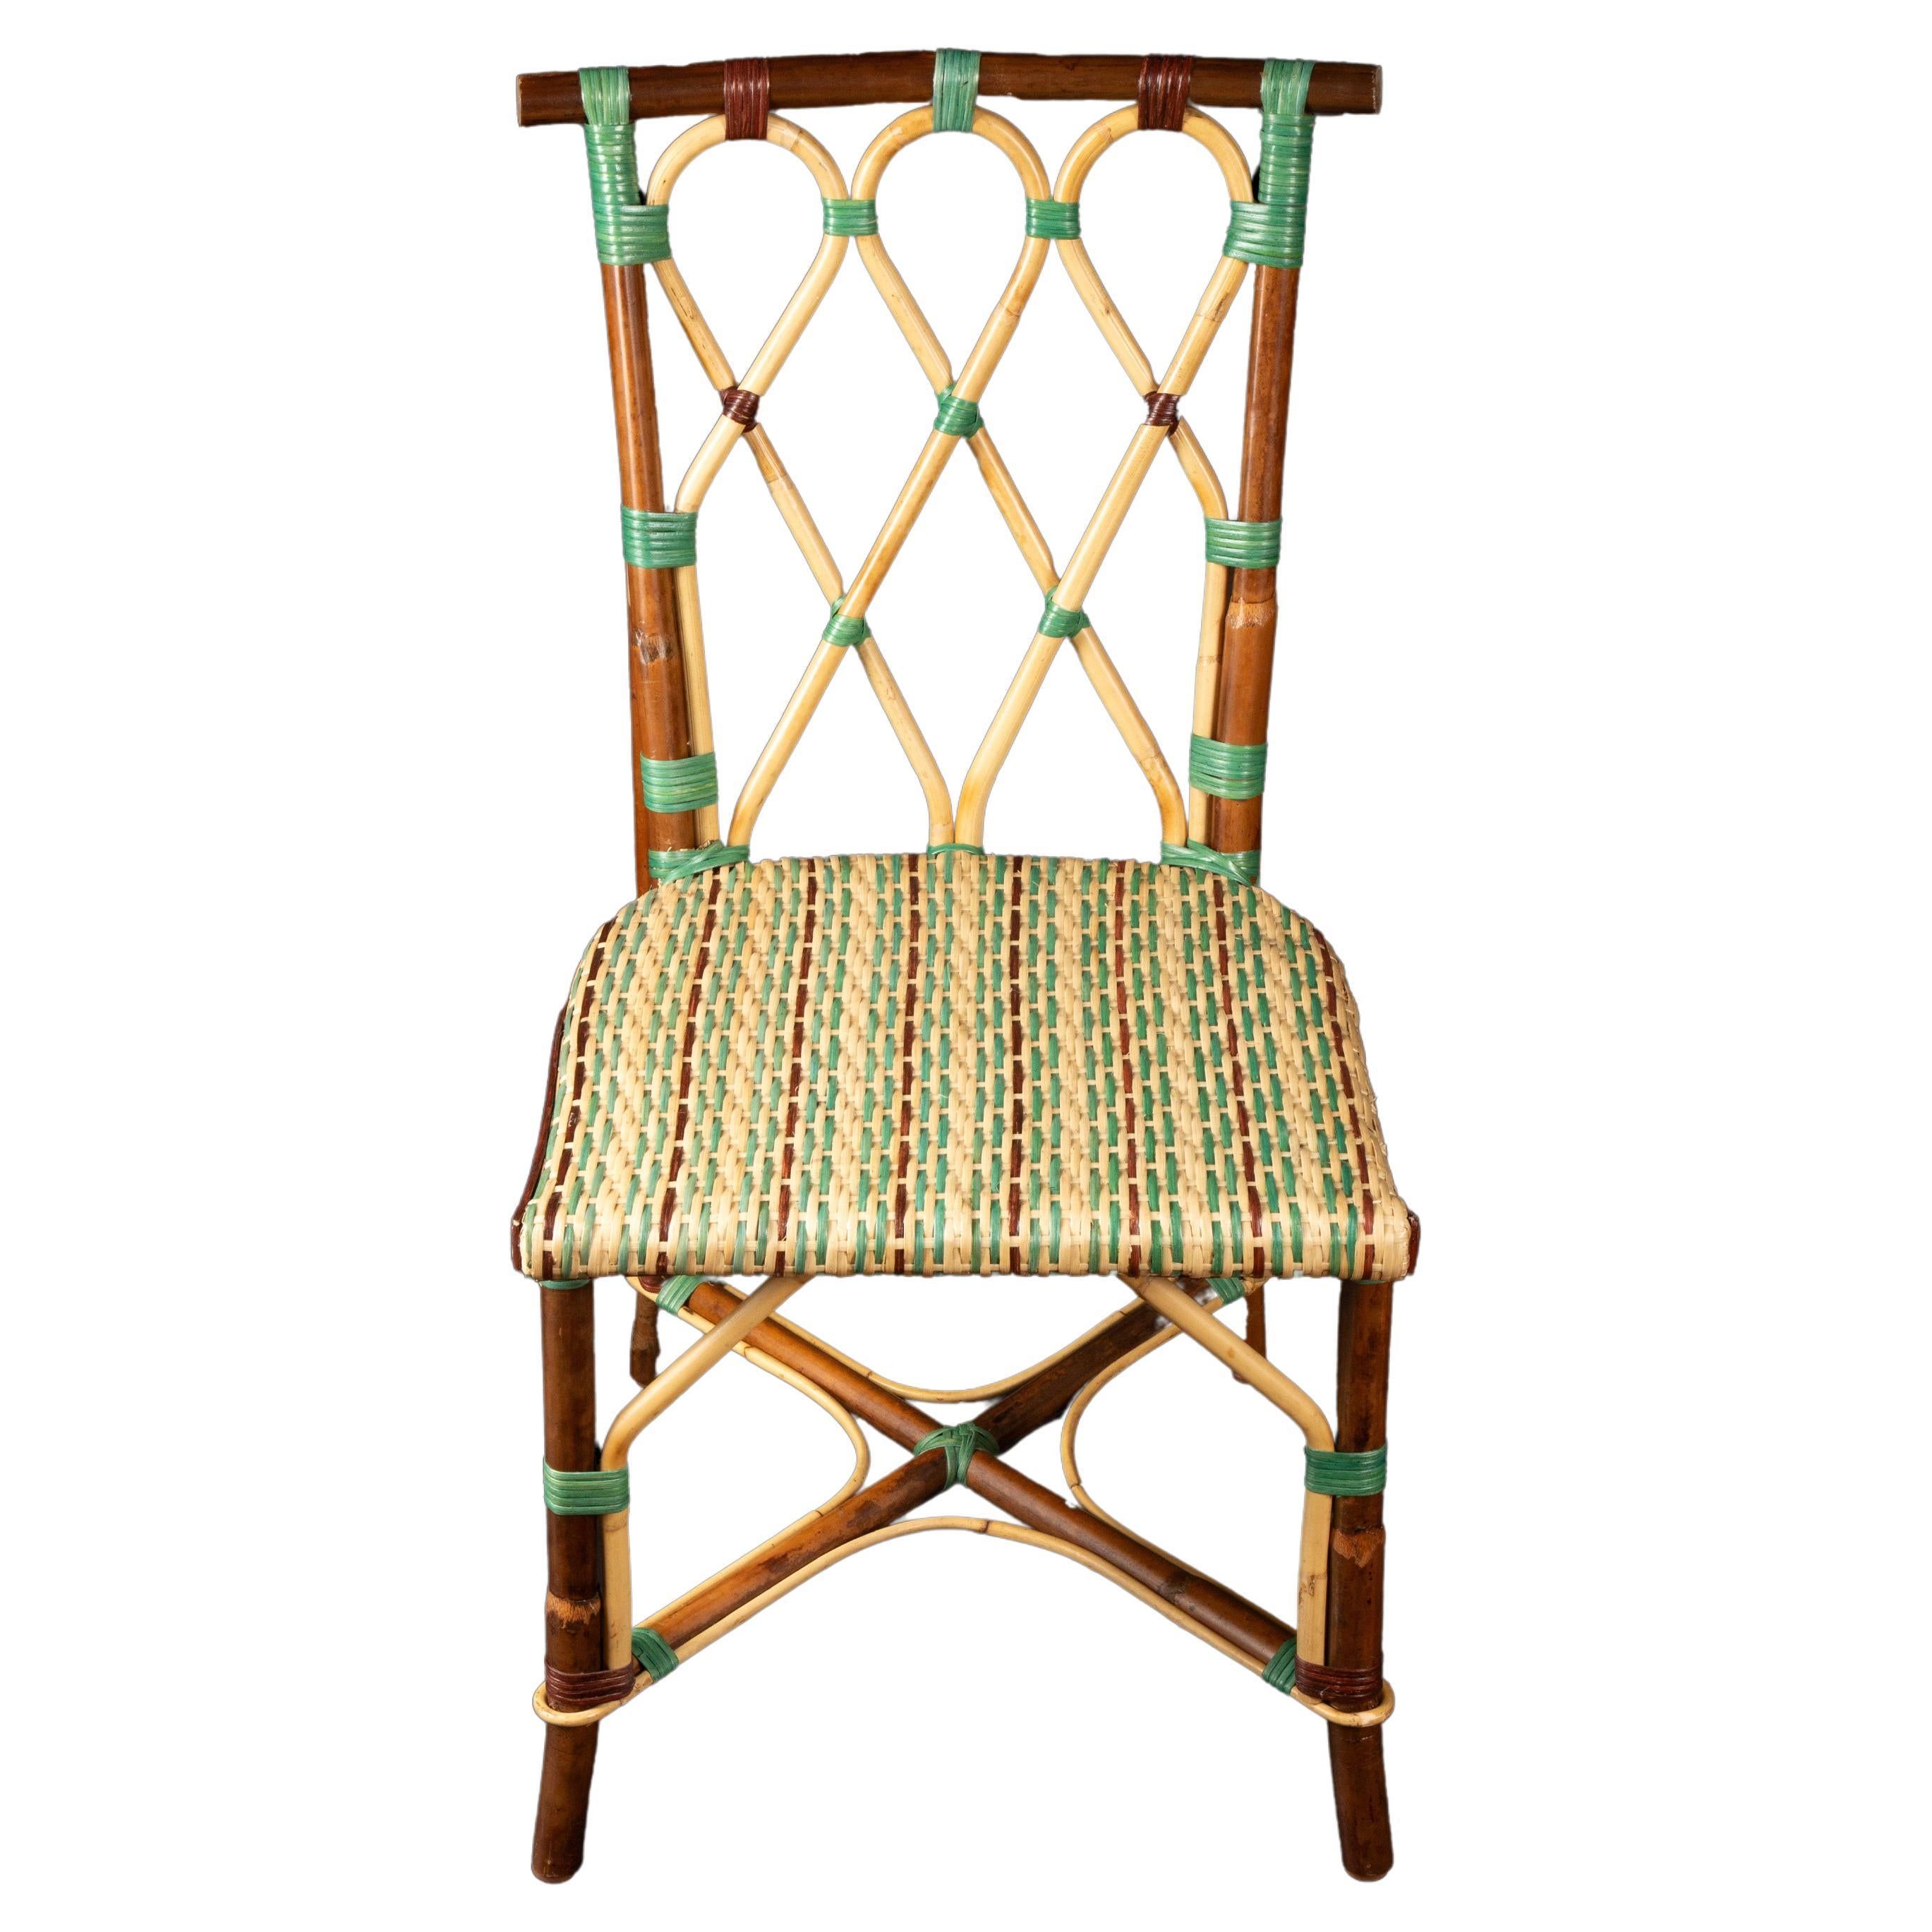 Creel and Gow Juliette Rattan Chair